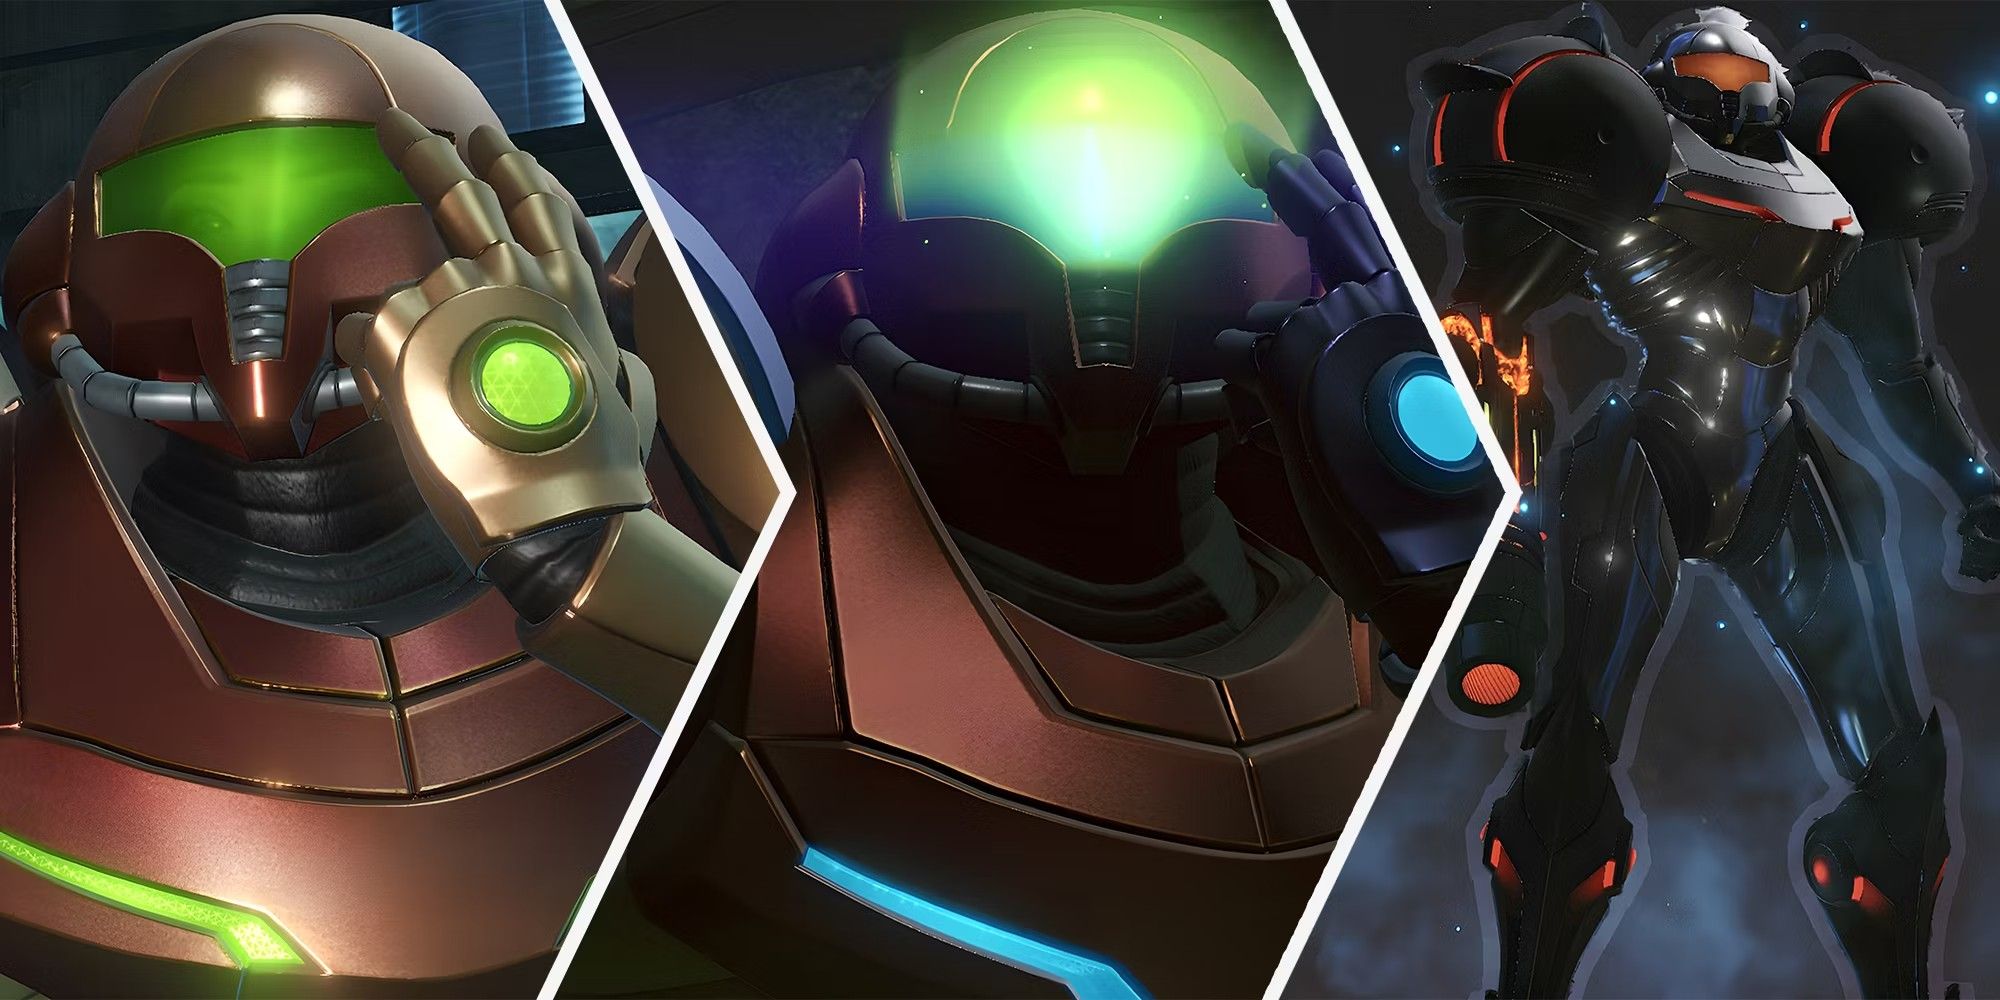 A collage showing Samus with three diferent suits.